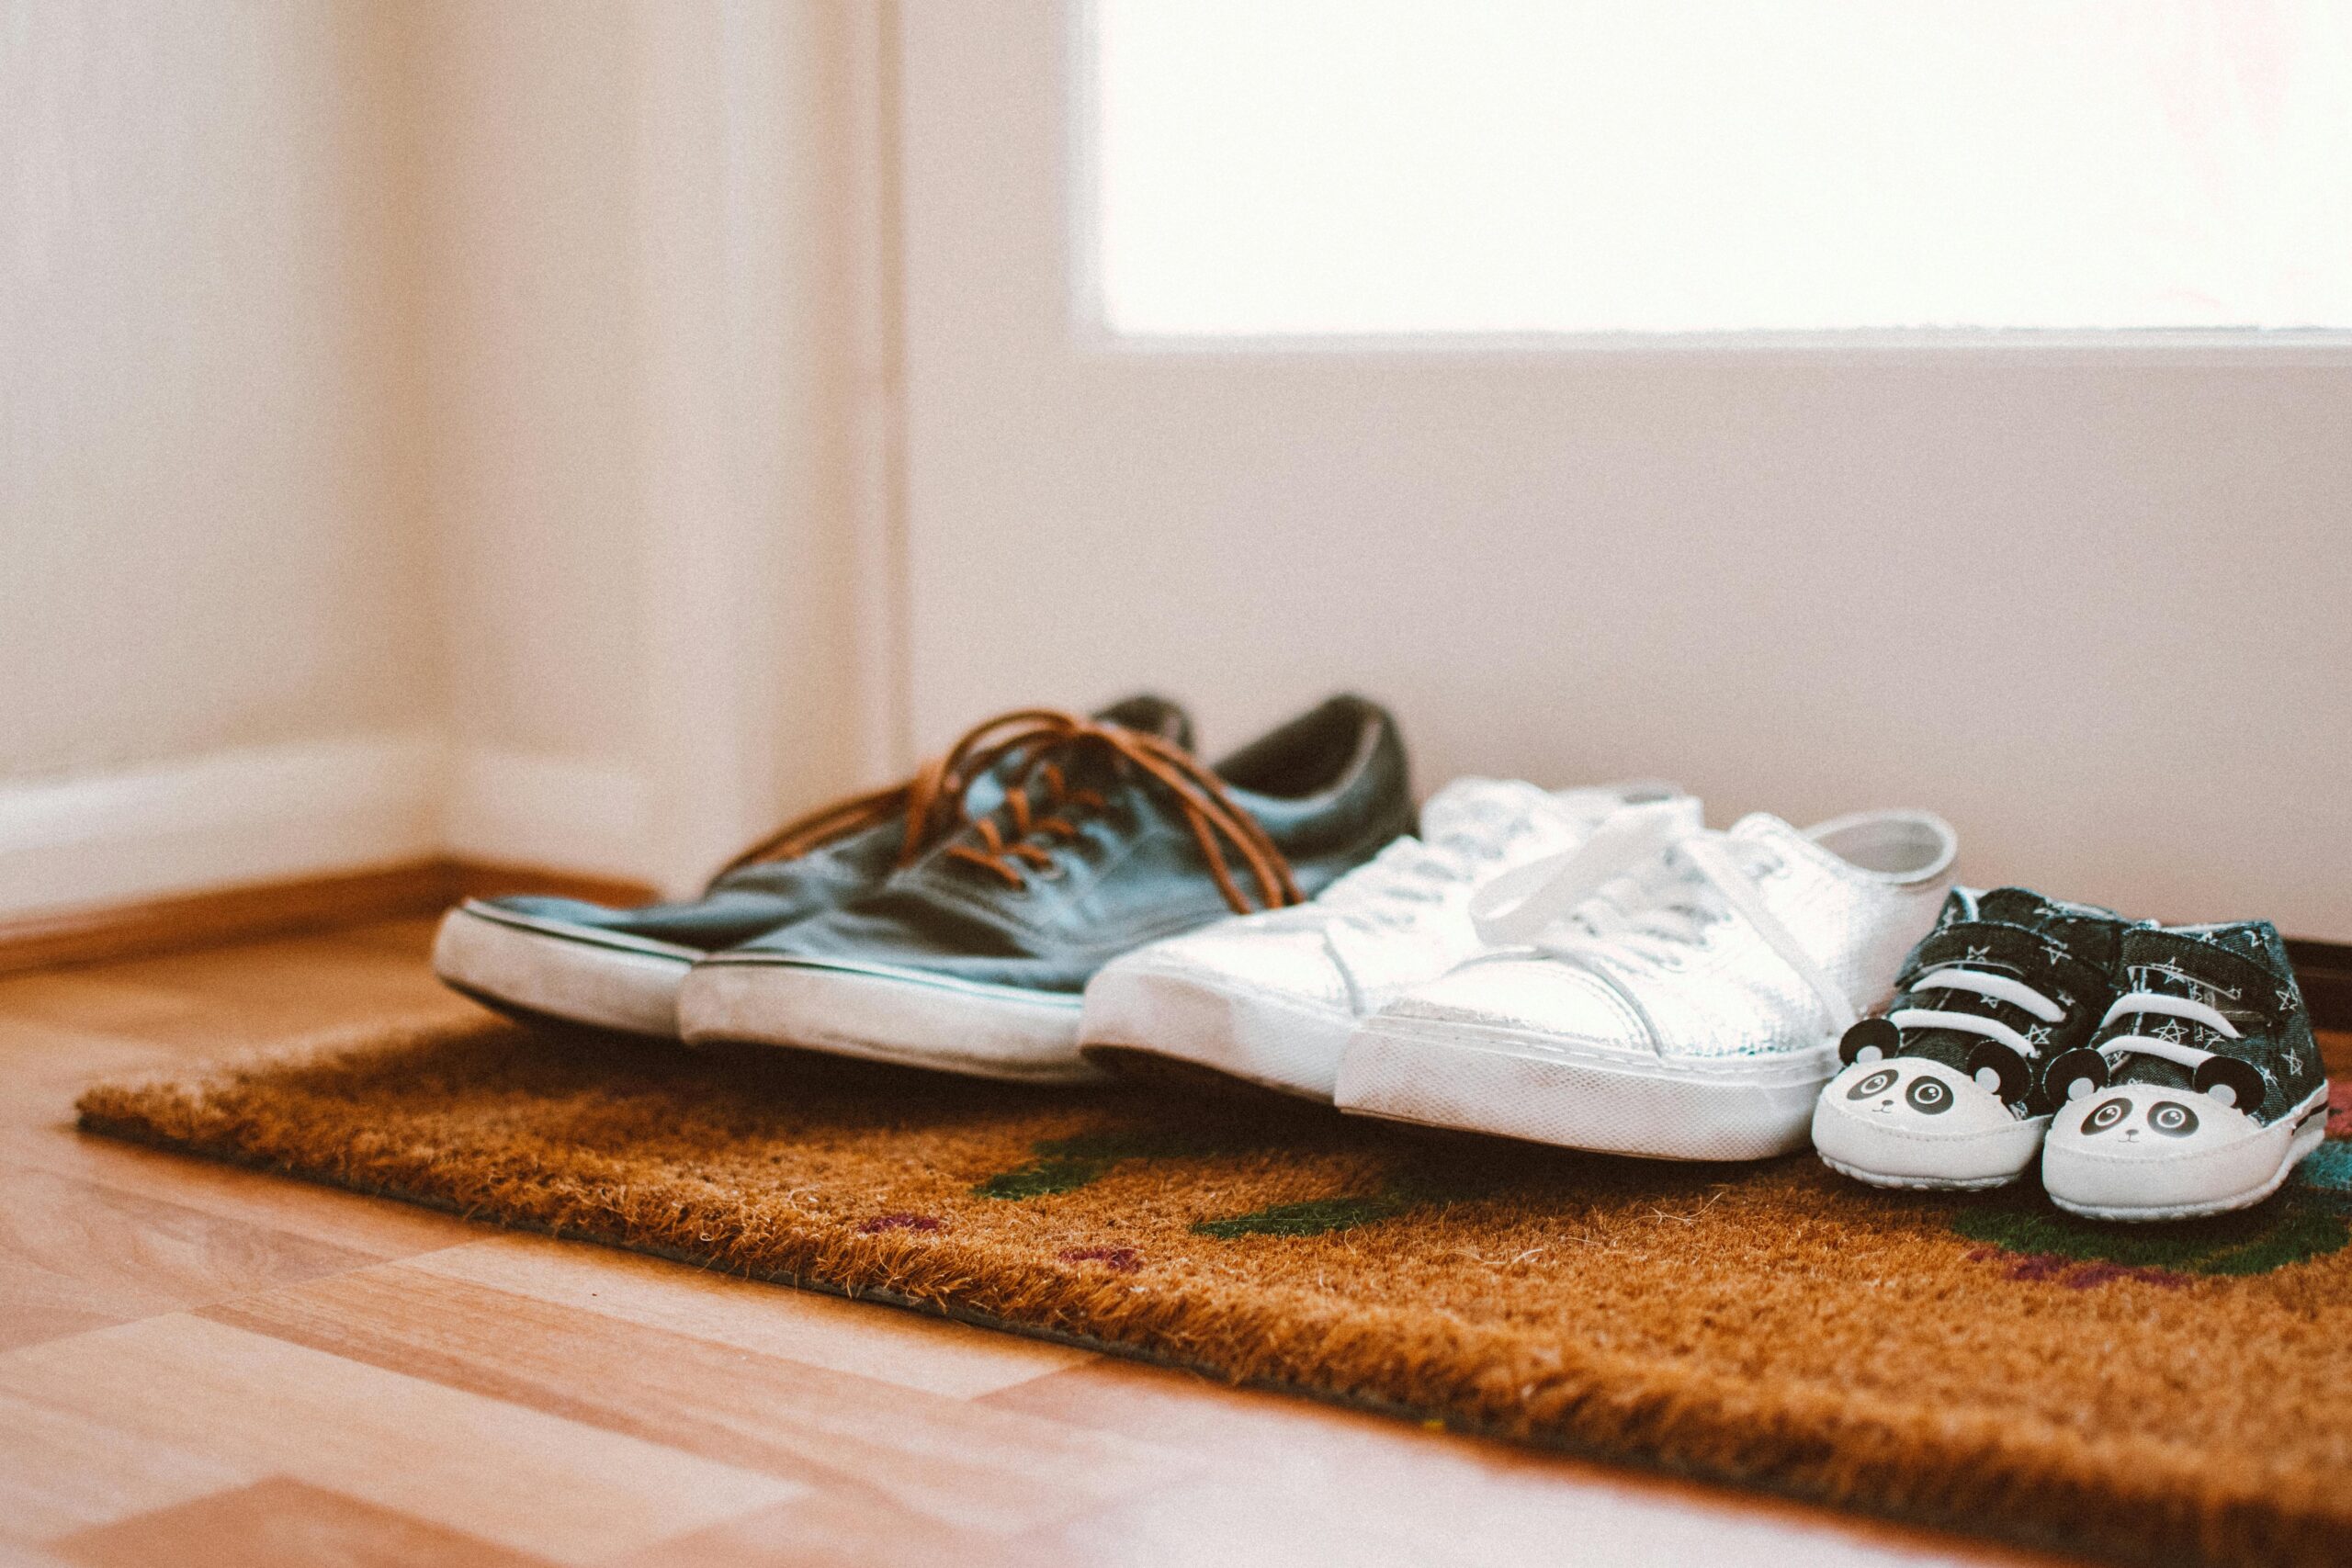 Pairs of shoes in a family representing Family Law Rules in a divorce and the expectation to abide by the court order